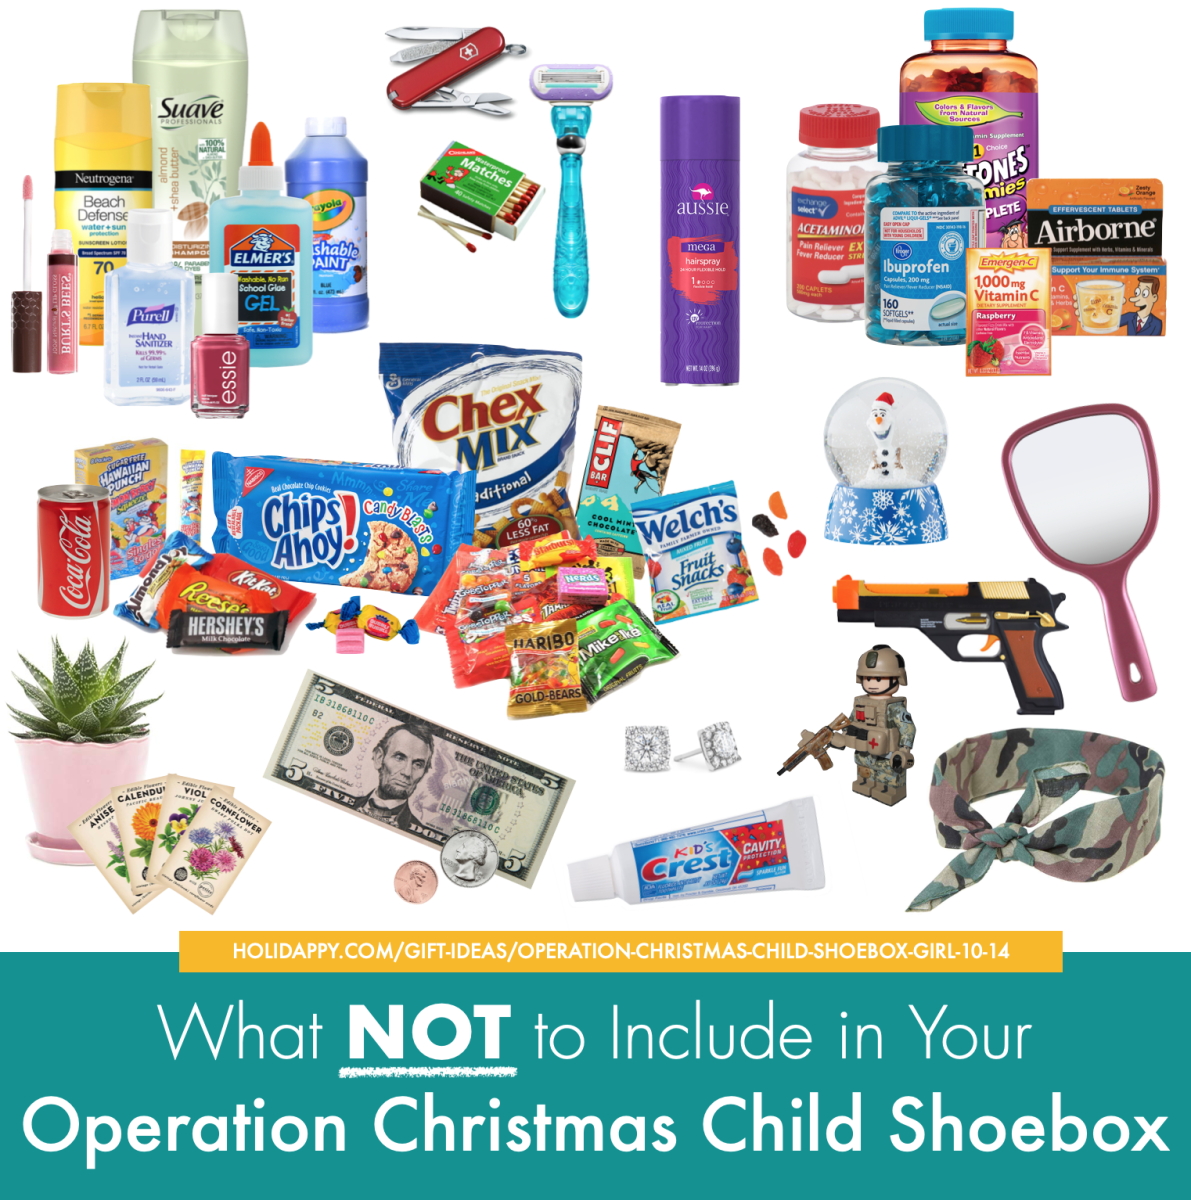 What NOT to include in an Operation Christmas Child Shoebox. From candy to toothpaste, customs regulations limit what you can send overseas.